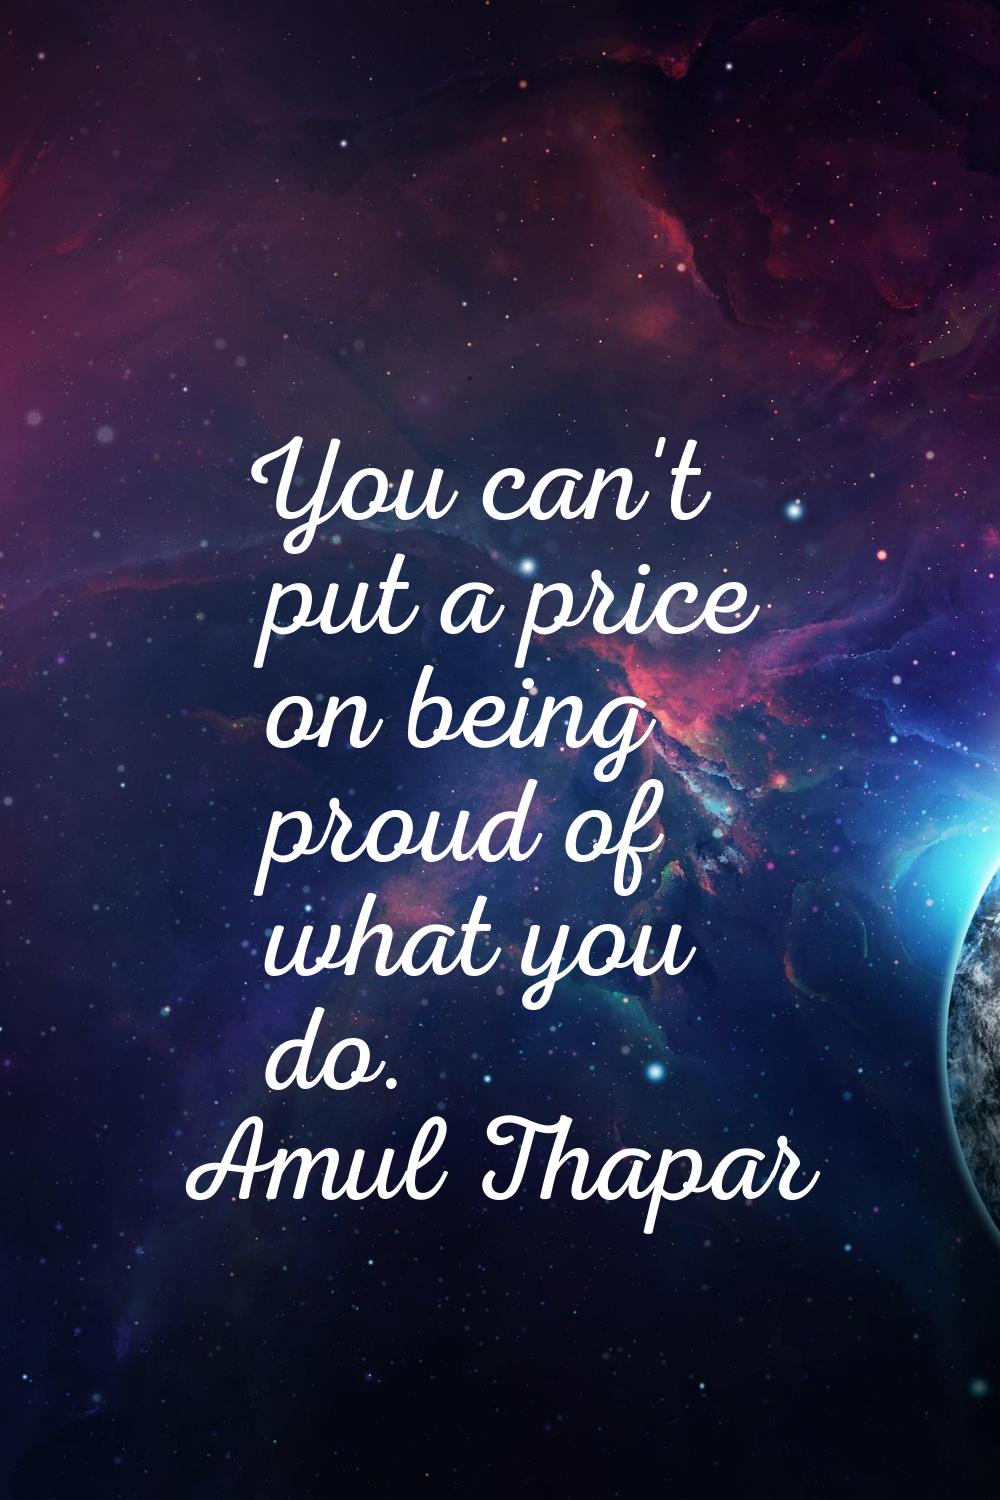 You can't put a price on being proud of what you do.